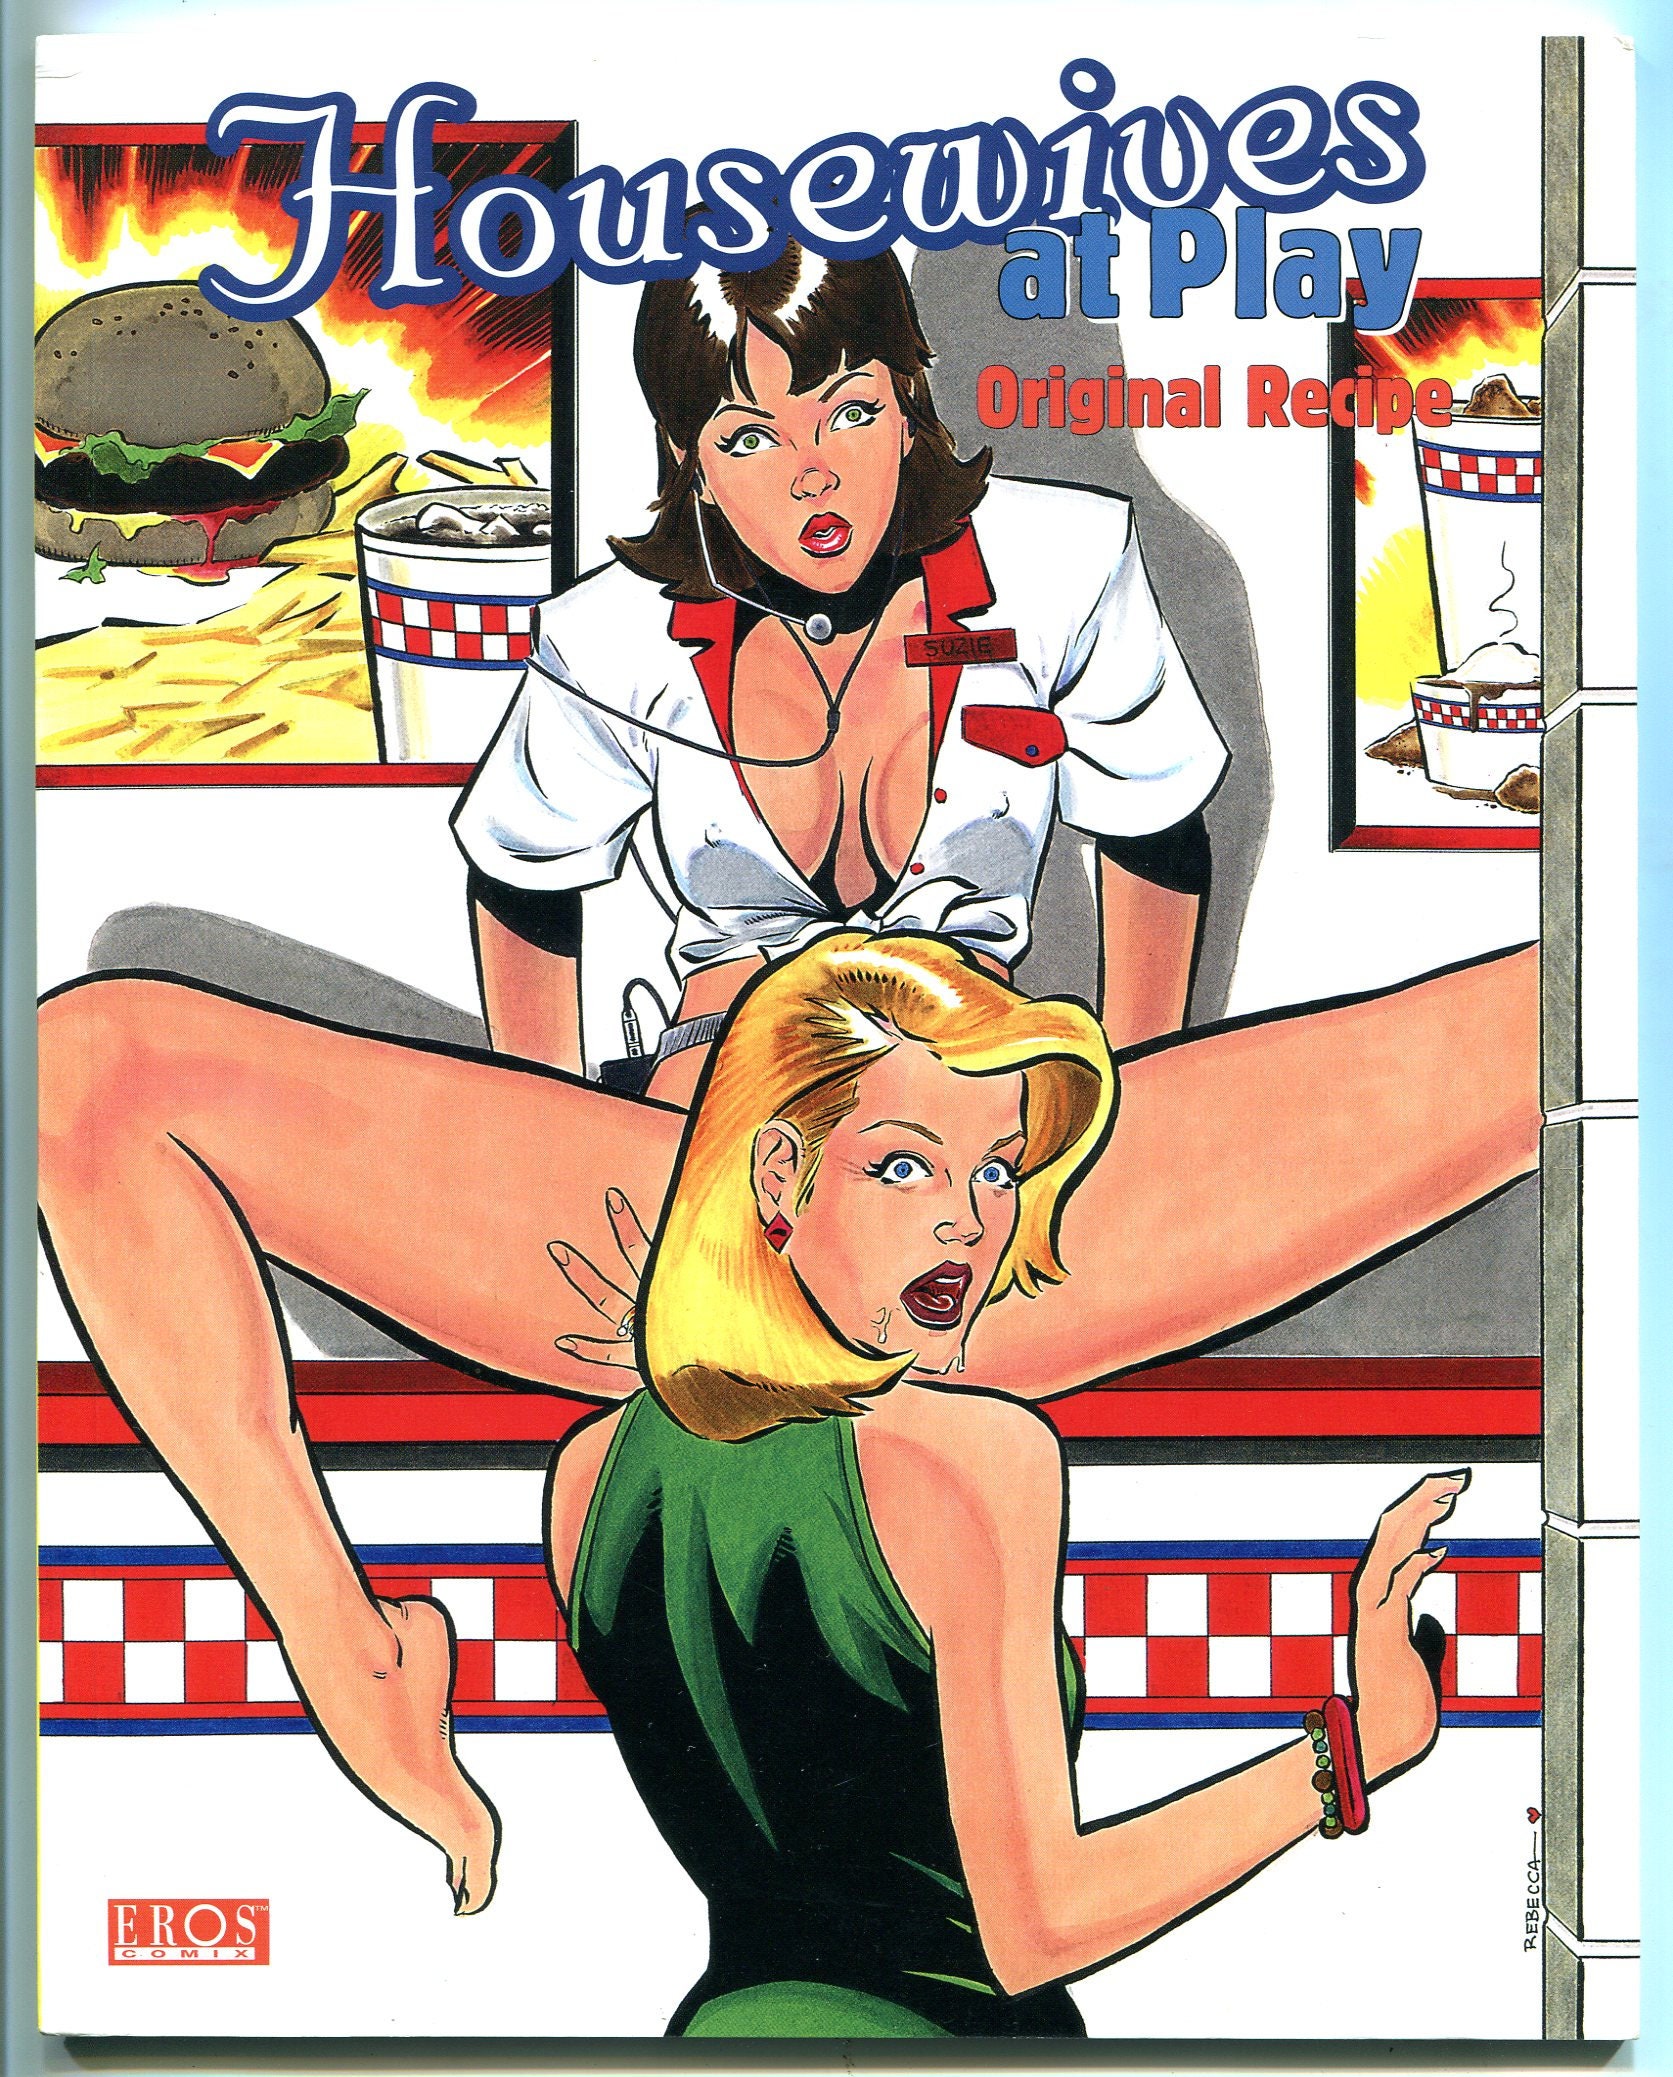 Housewives at Play Original Recipe GN Issue 1 eros 2007